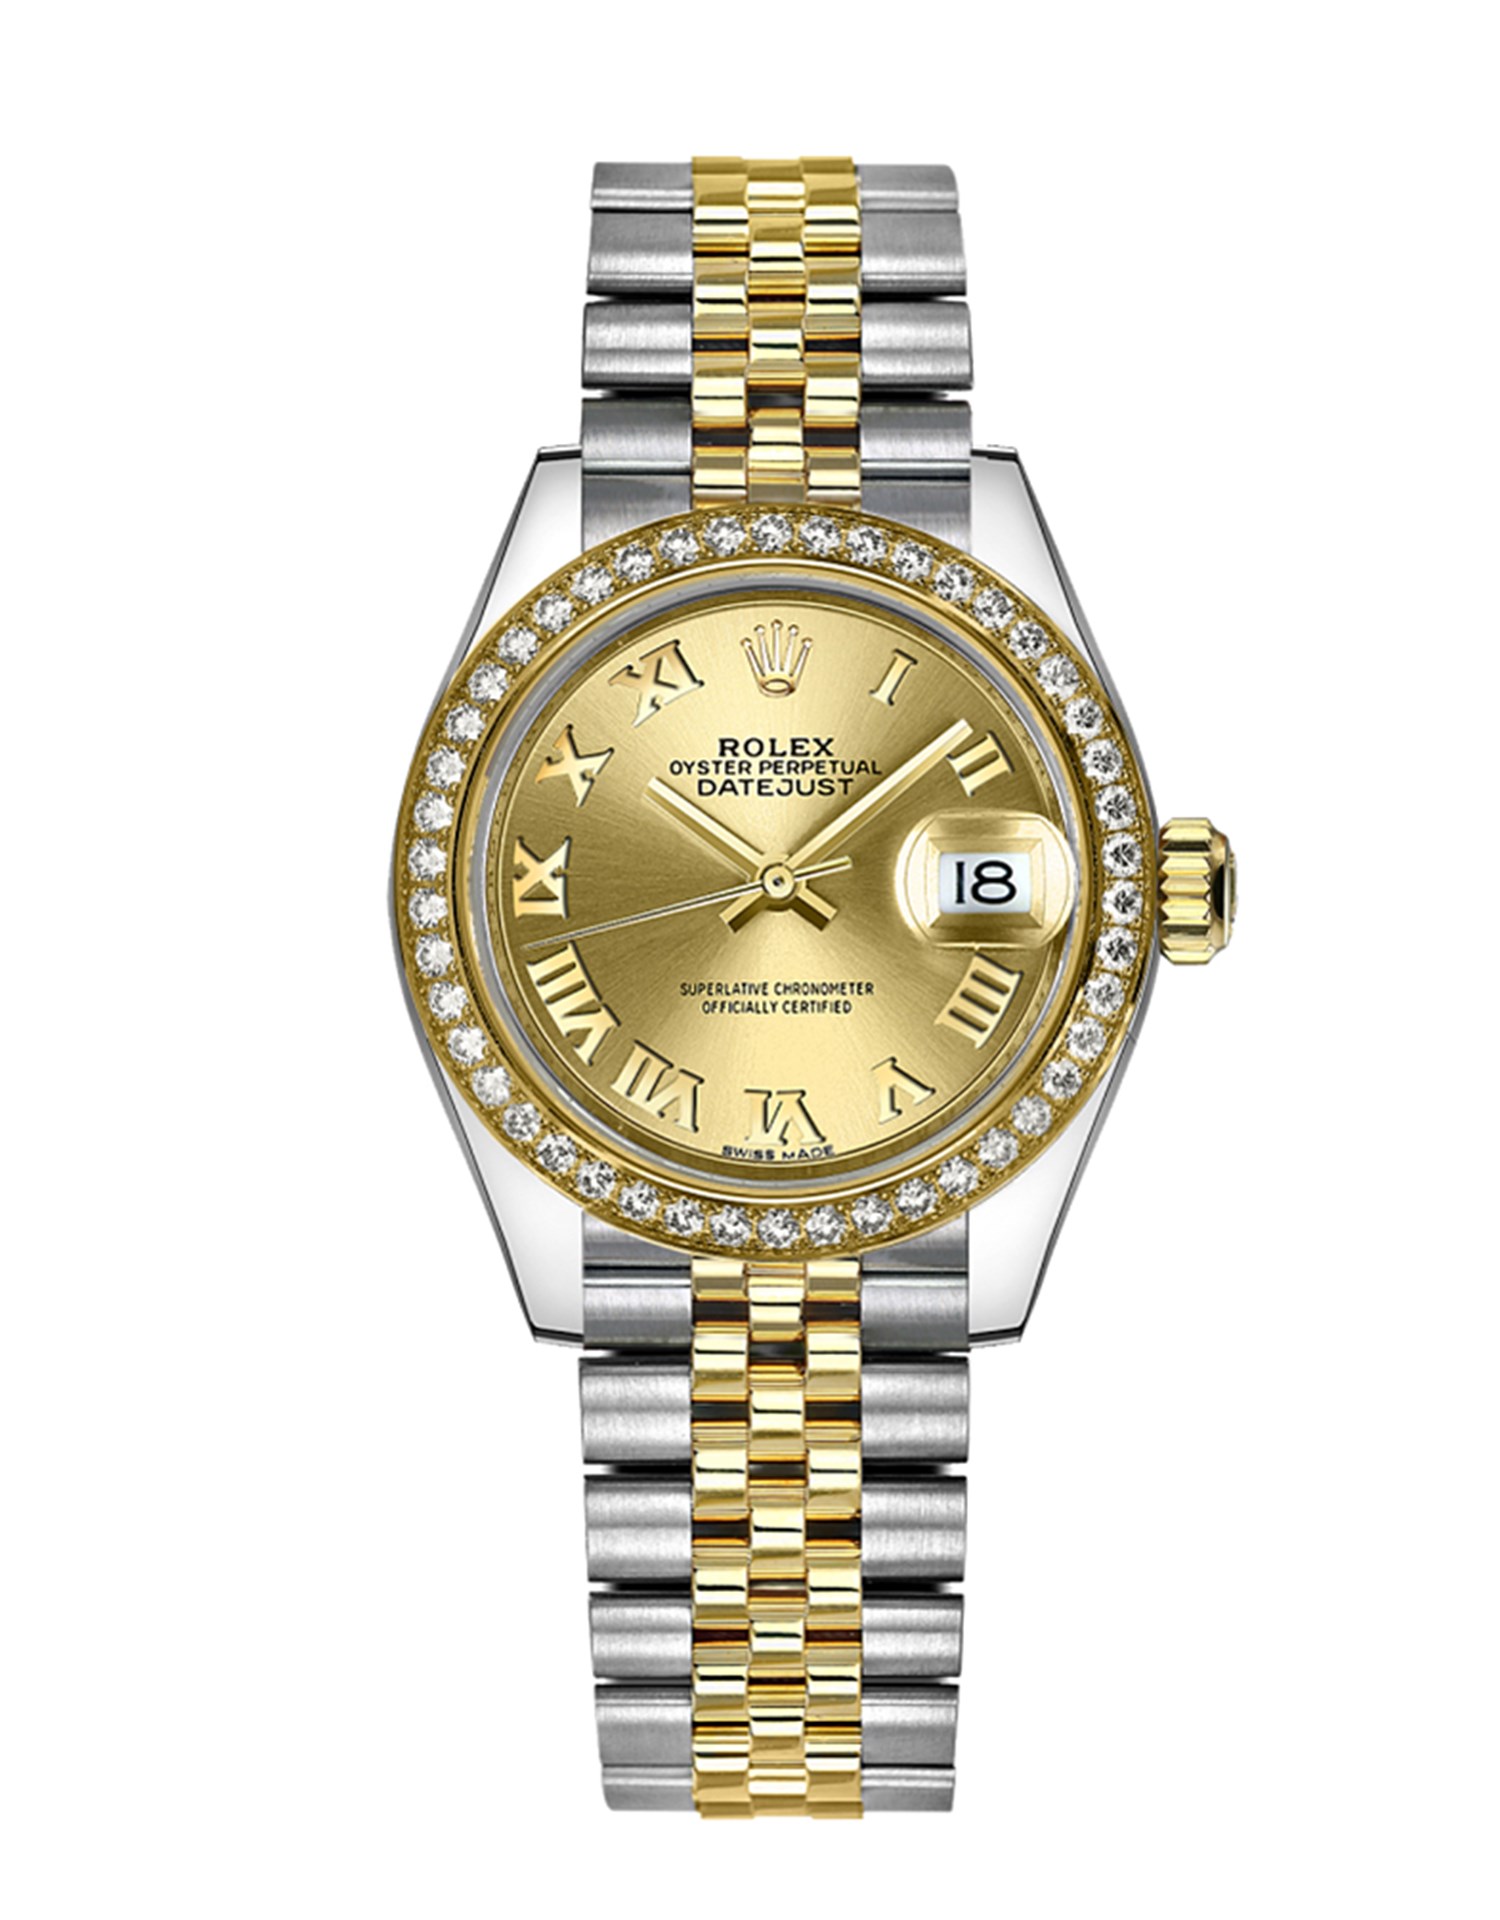 Rolex Datejust Mujer 904L Acero inoxidable Oystersteel 28MM - muchwatches.com